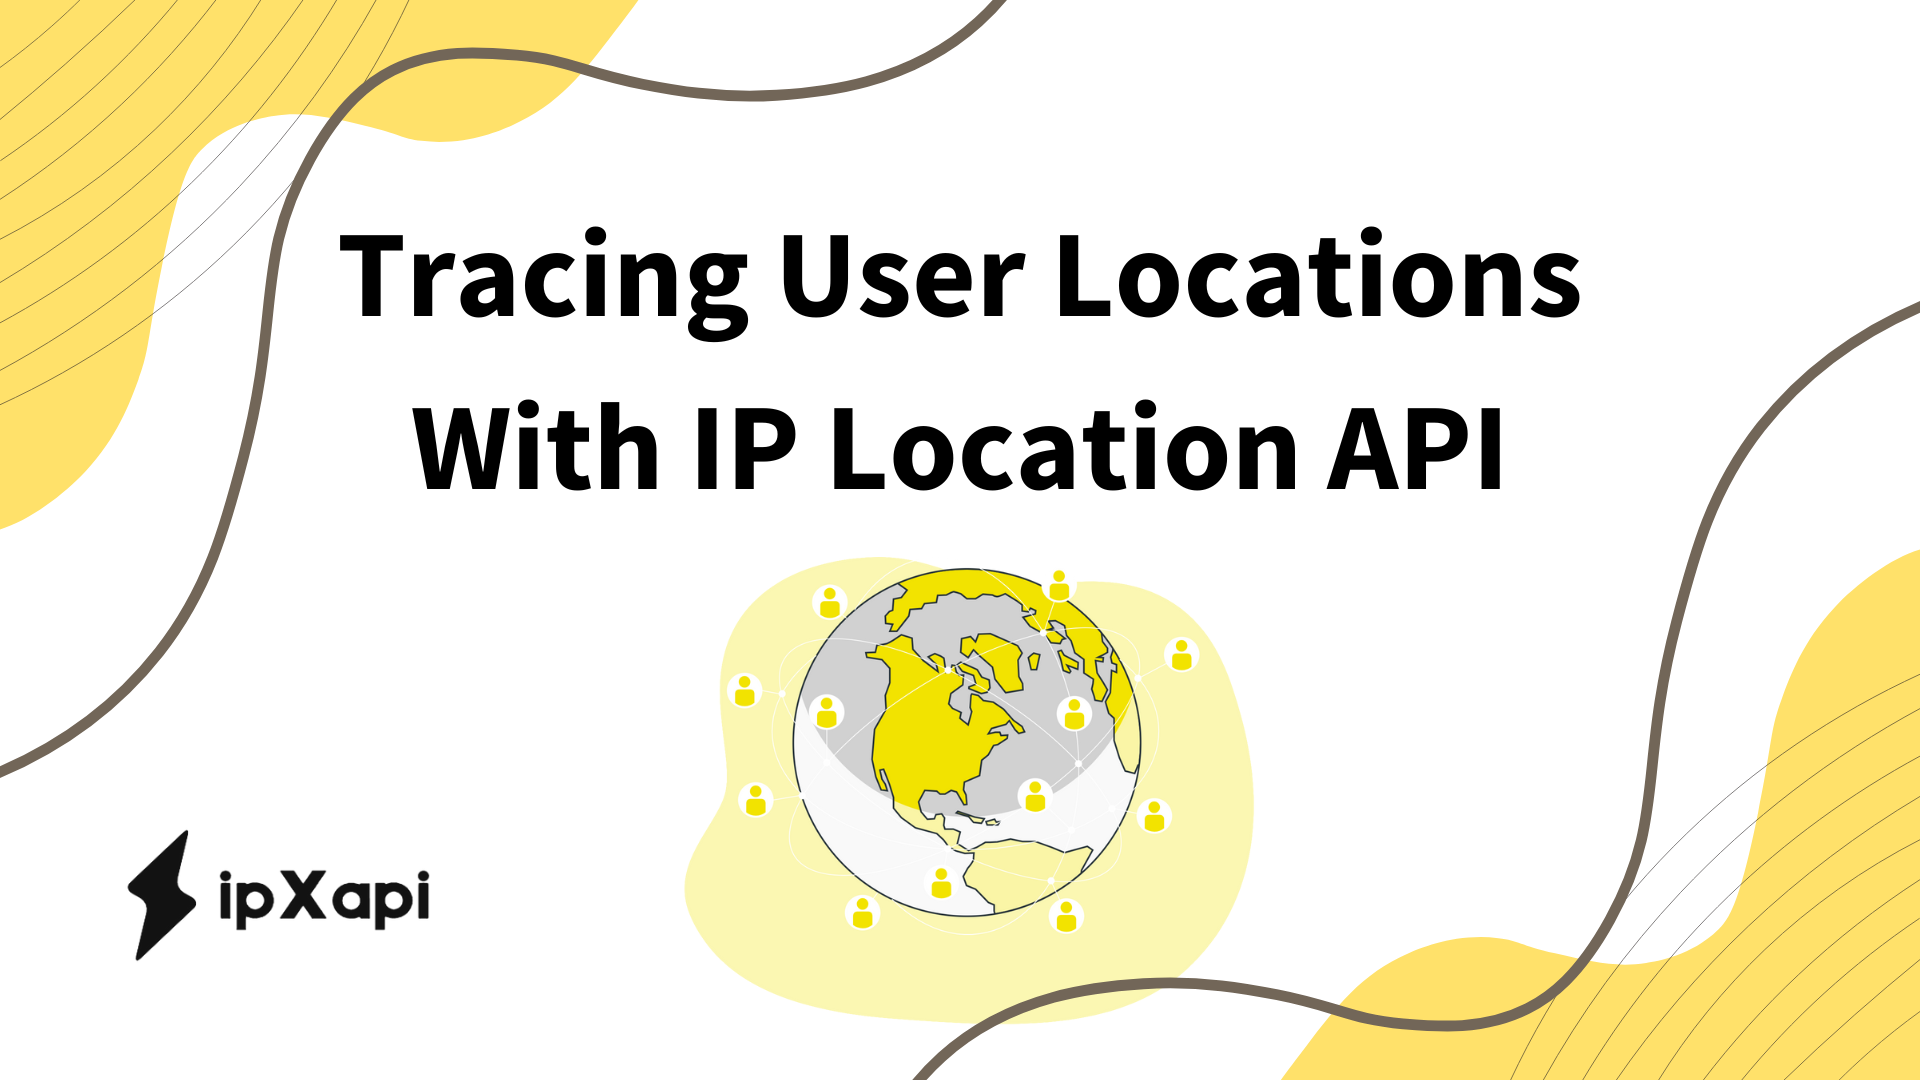 Tracing User Locations With IP Location API